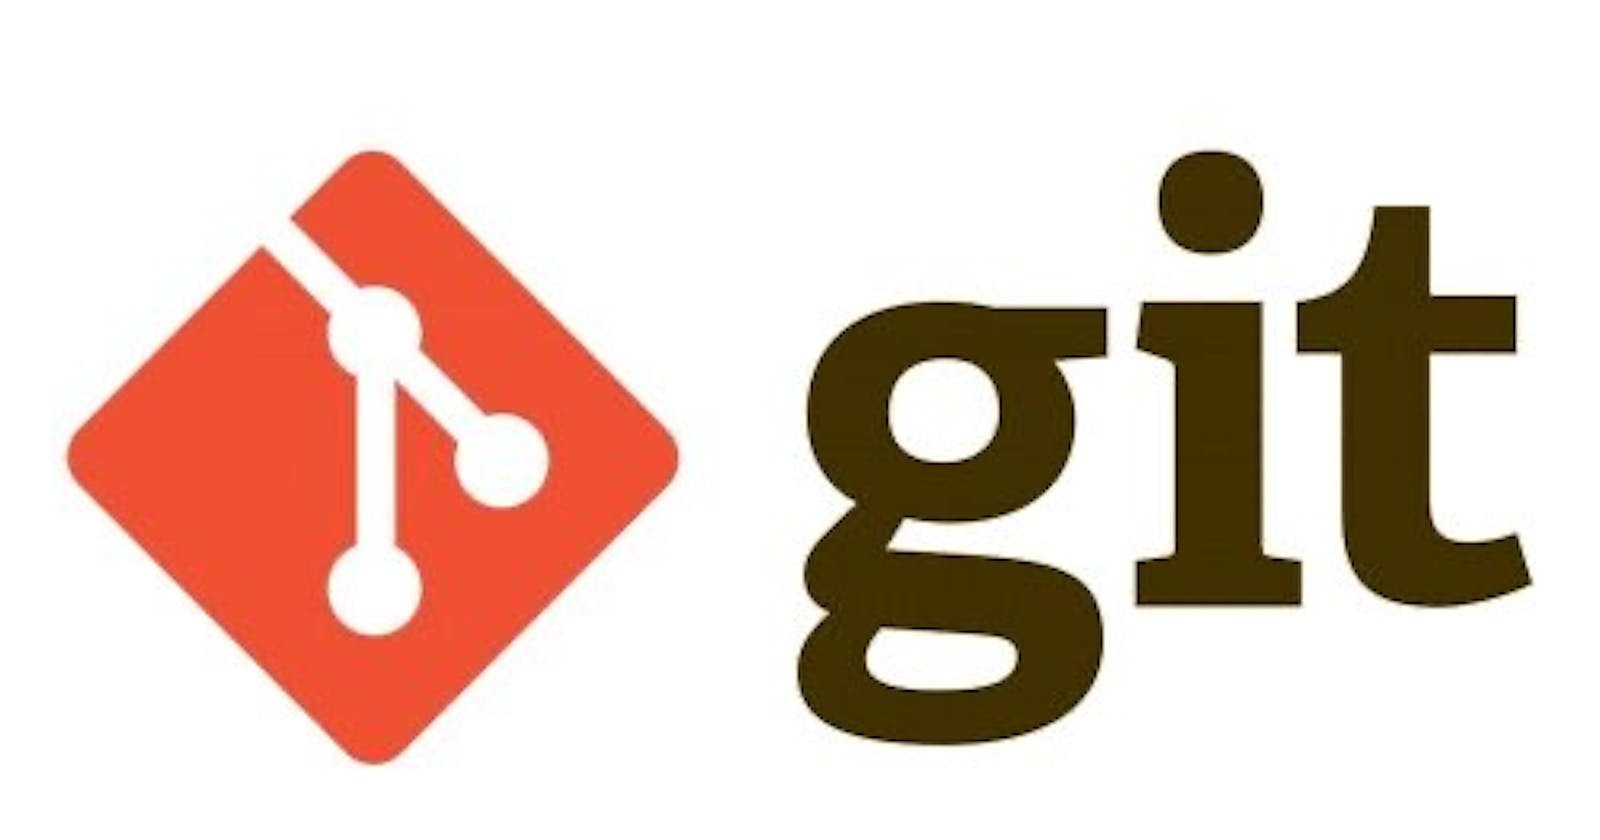 How to Install Git and use Git Commands